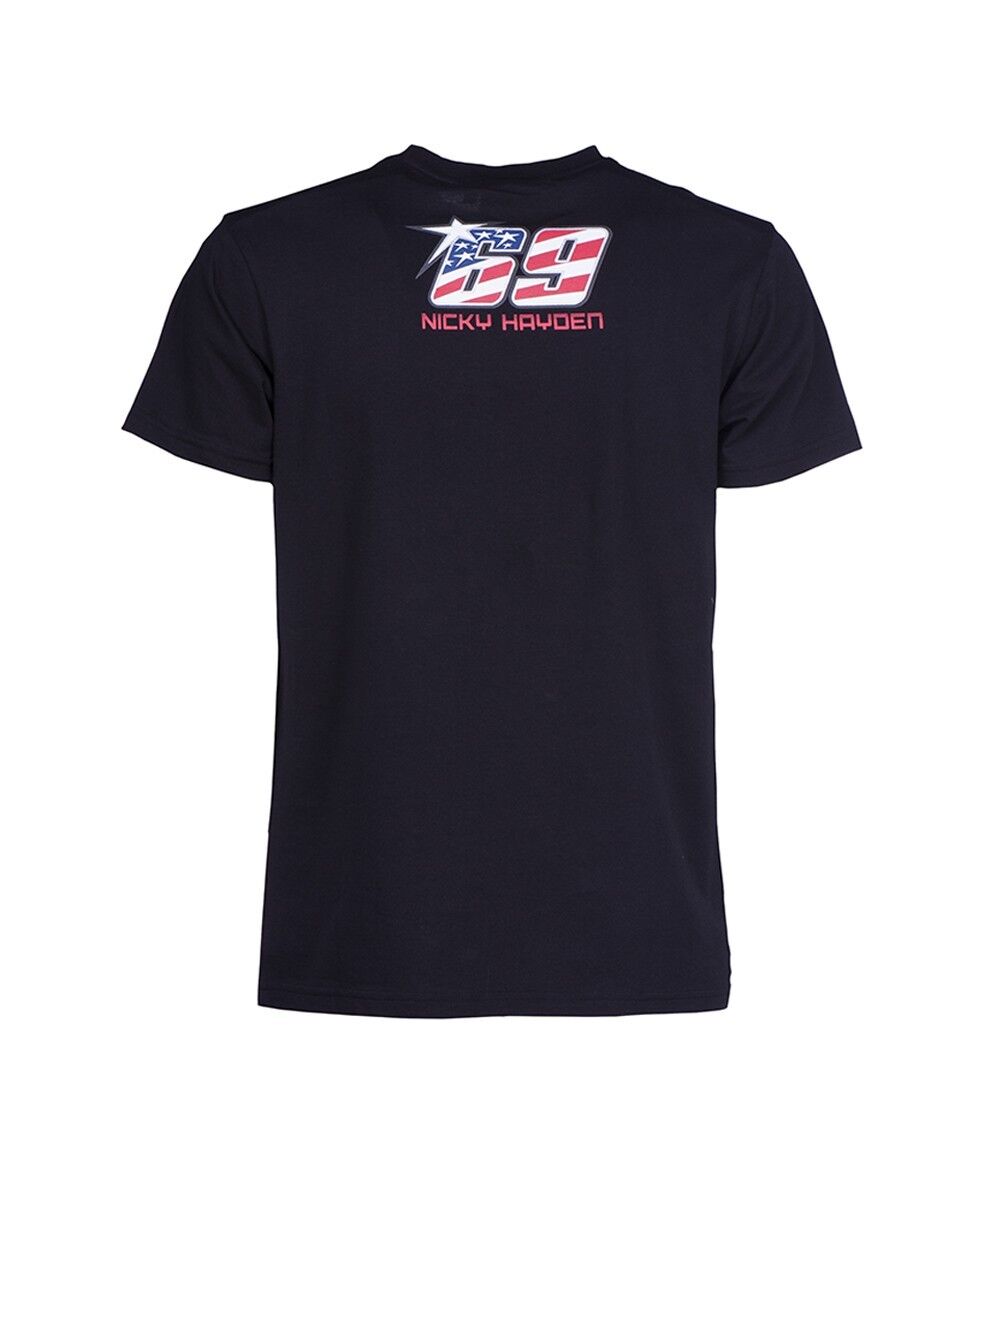 Official Nicky Hayden - Authentic Rider T-Shirt - 17 34002